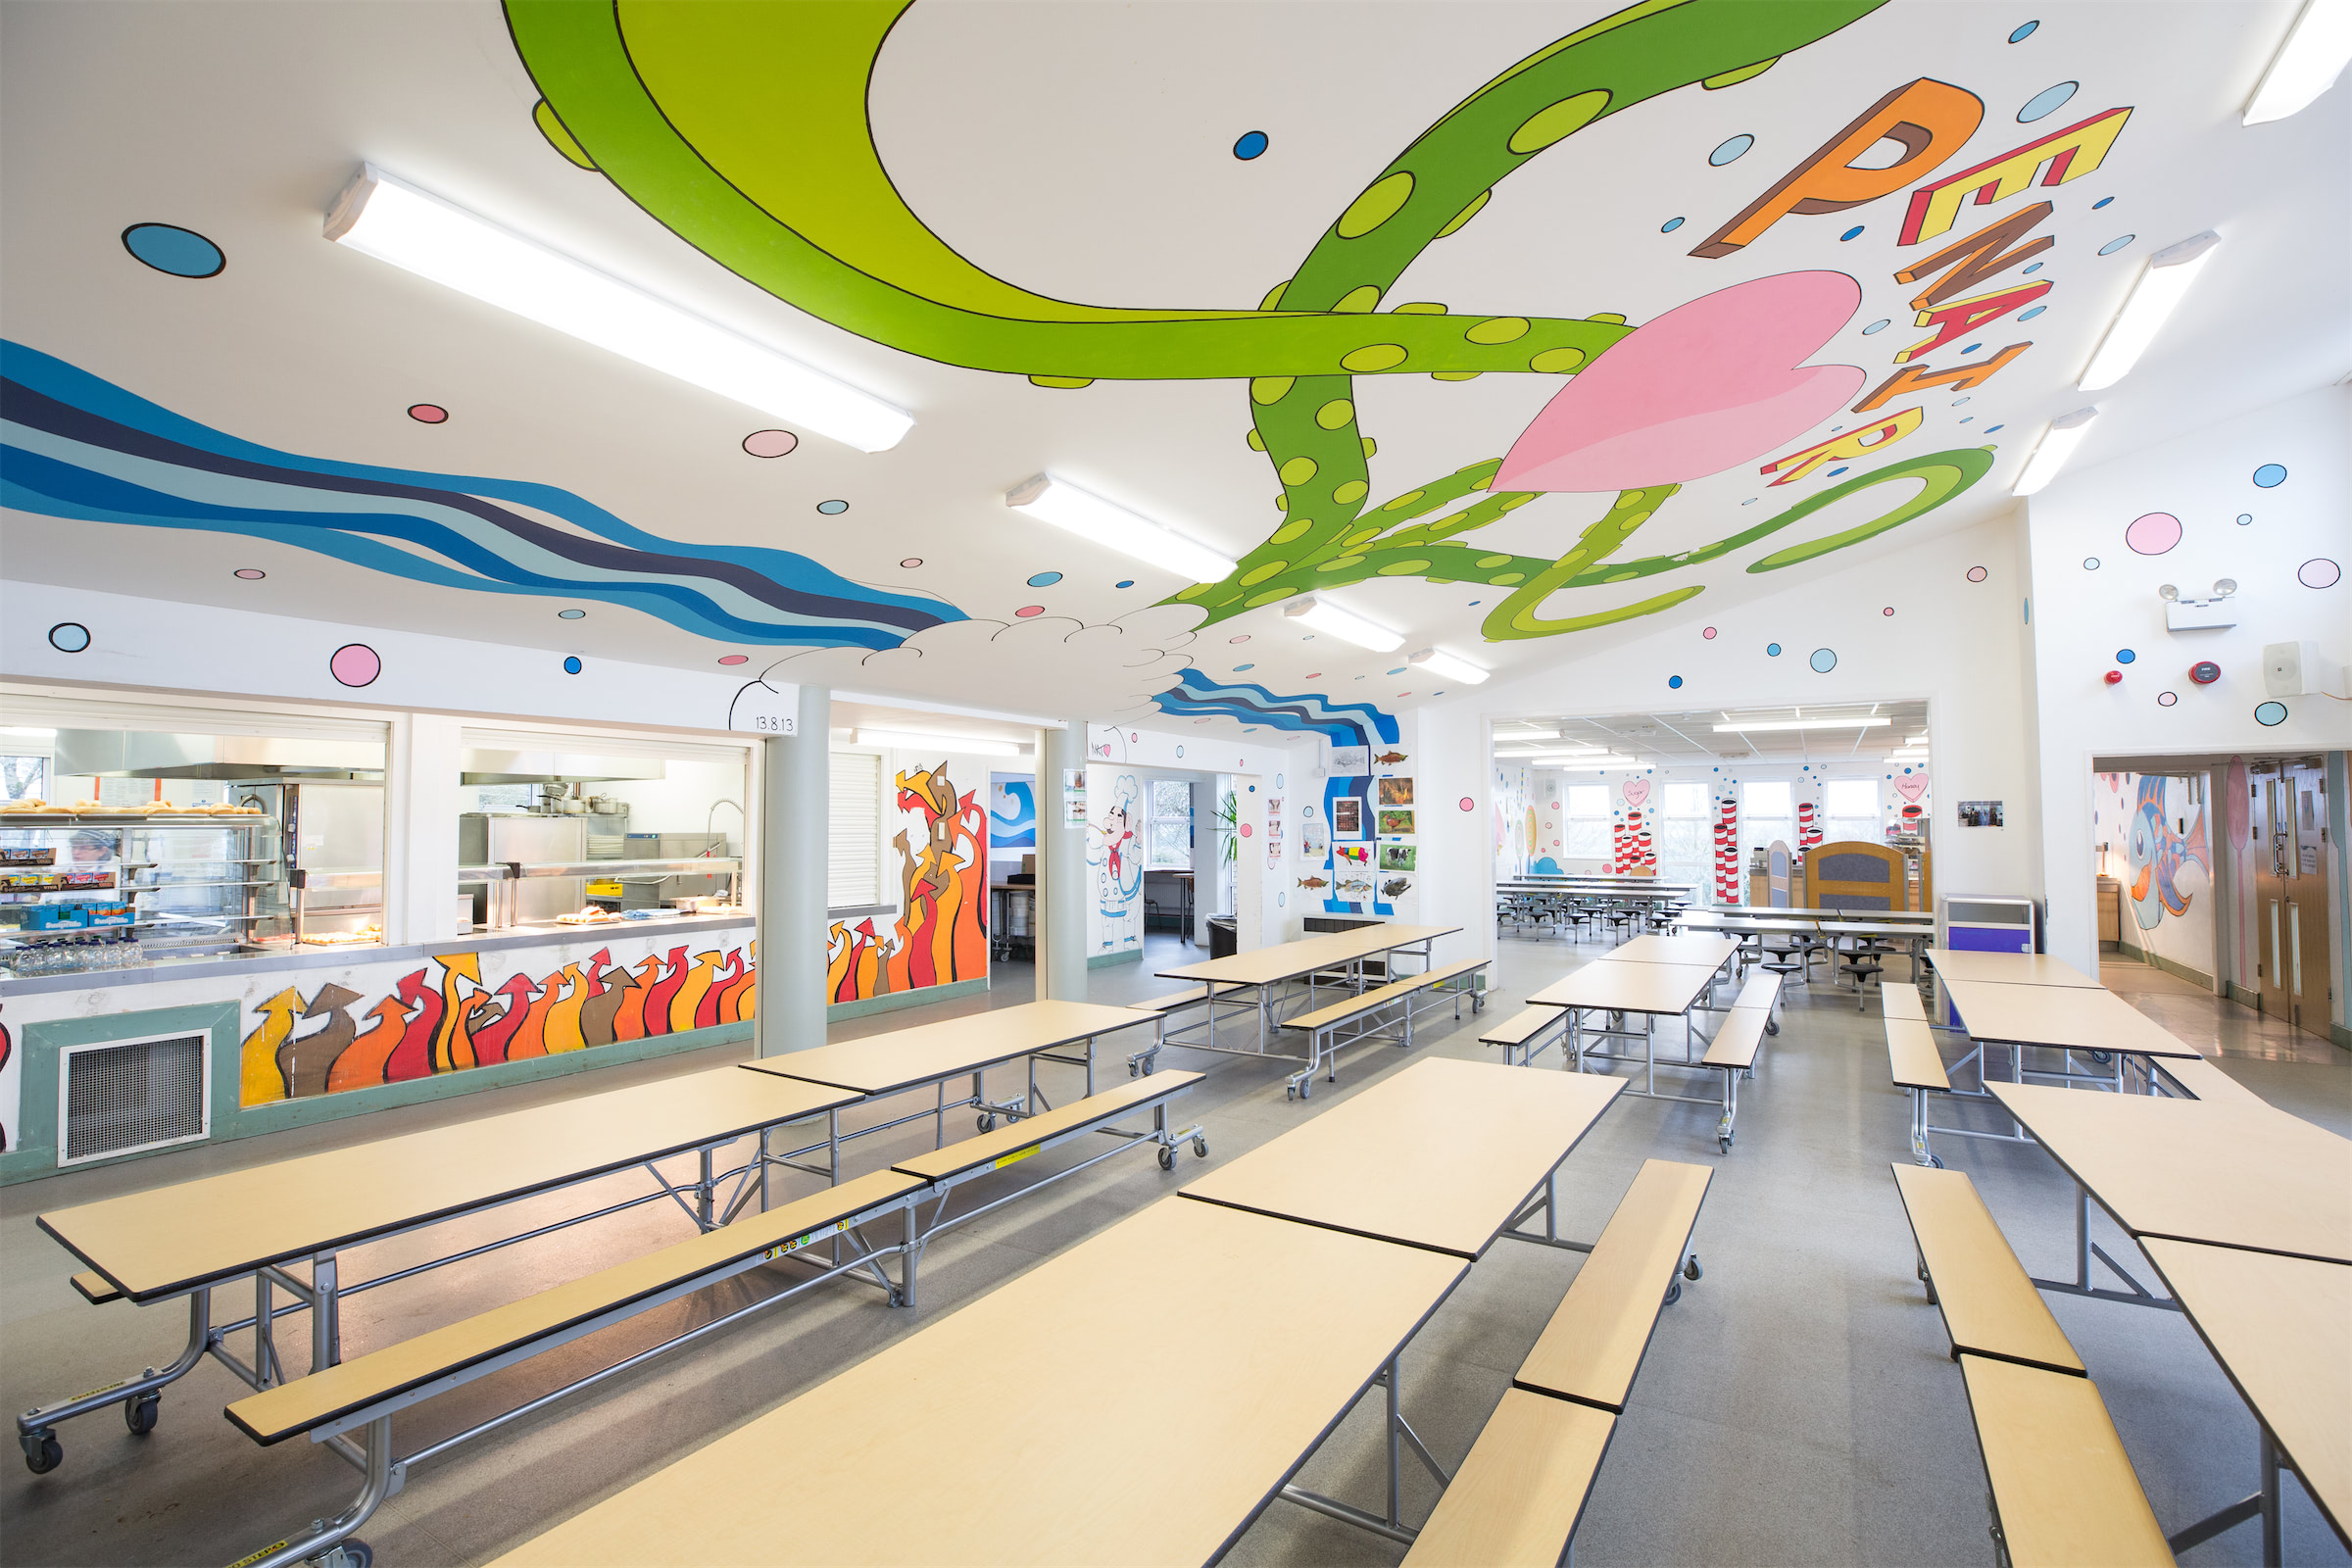 School Canteen Design And Layout